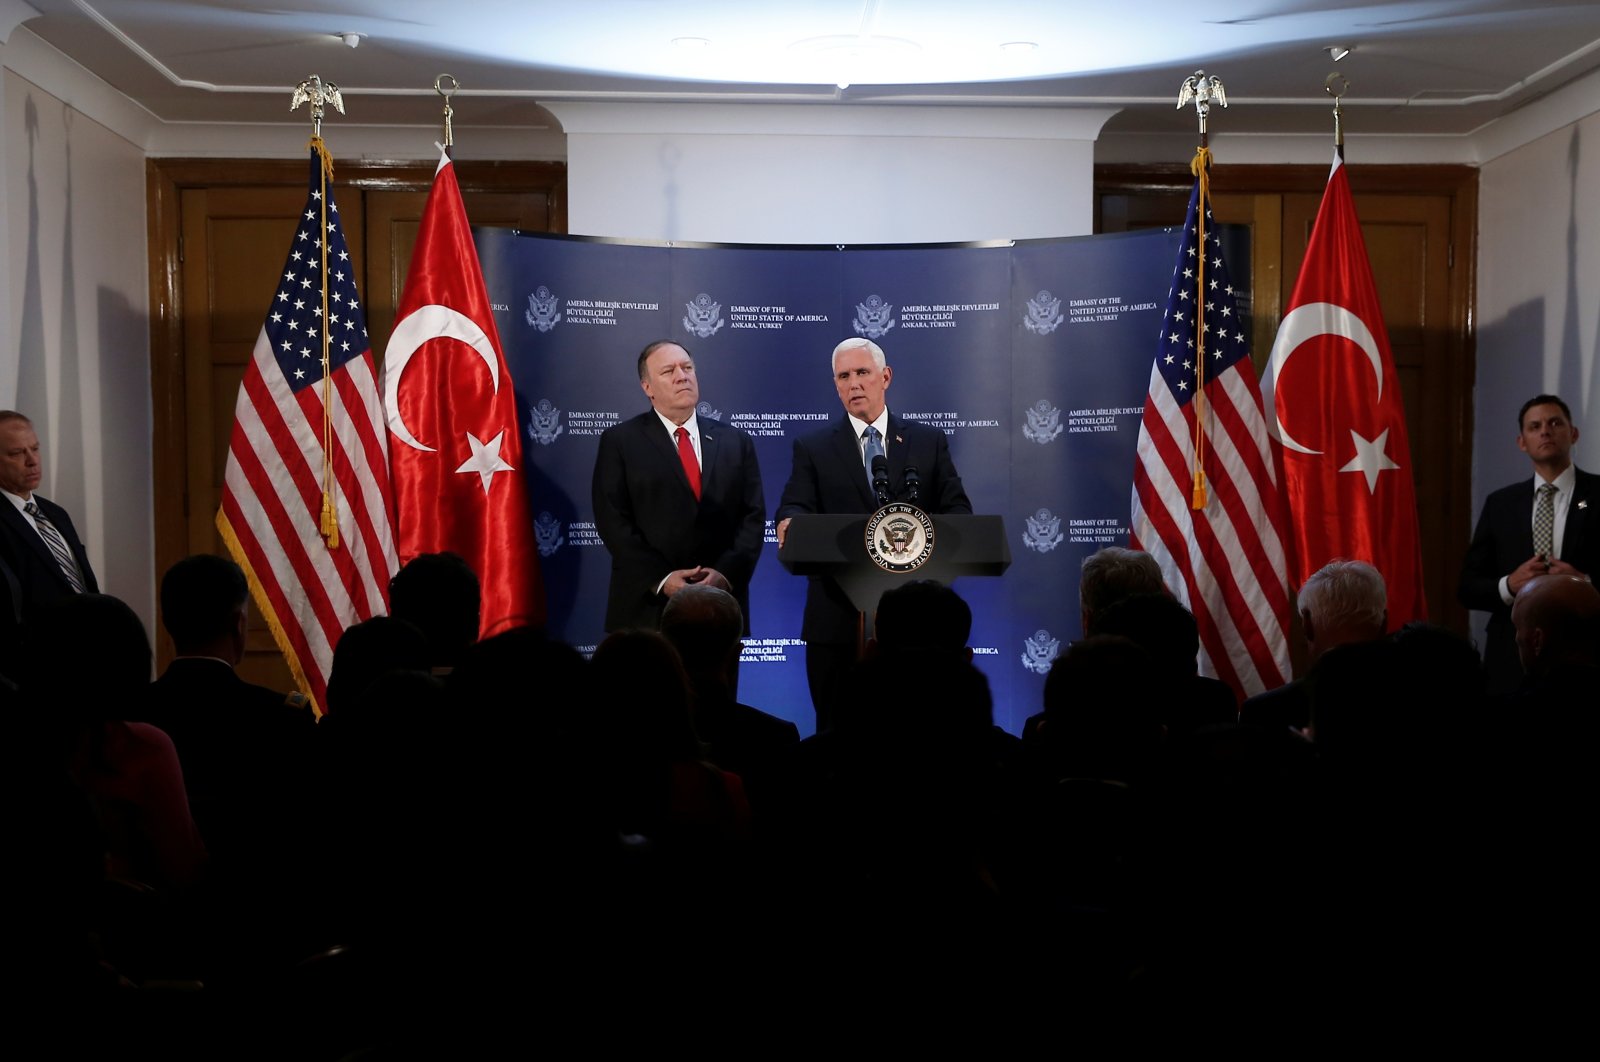 U.S. Vice President Mike Pence (R) speaks during a news conference, as U.S. Secretary of State Mike Pompeo (L) looks on, at the U.S. Embassy in Ankara, Türkiye, Oct. 17, 2019. (Reuters File Photo)